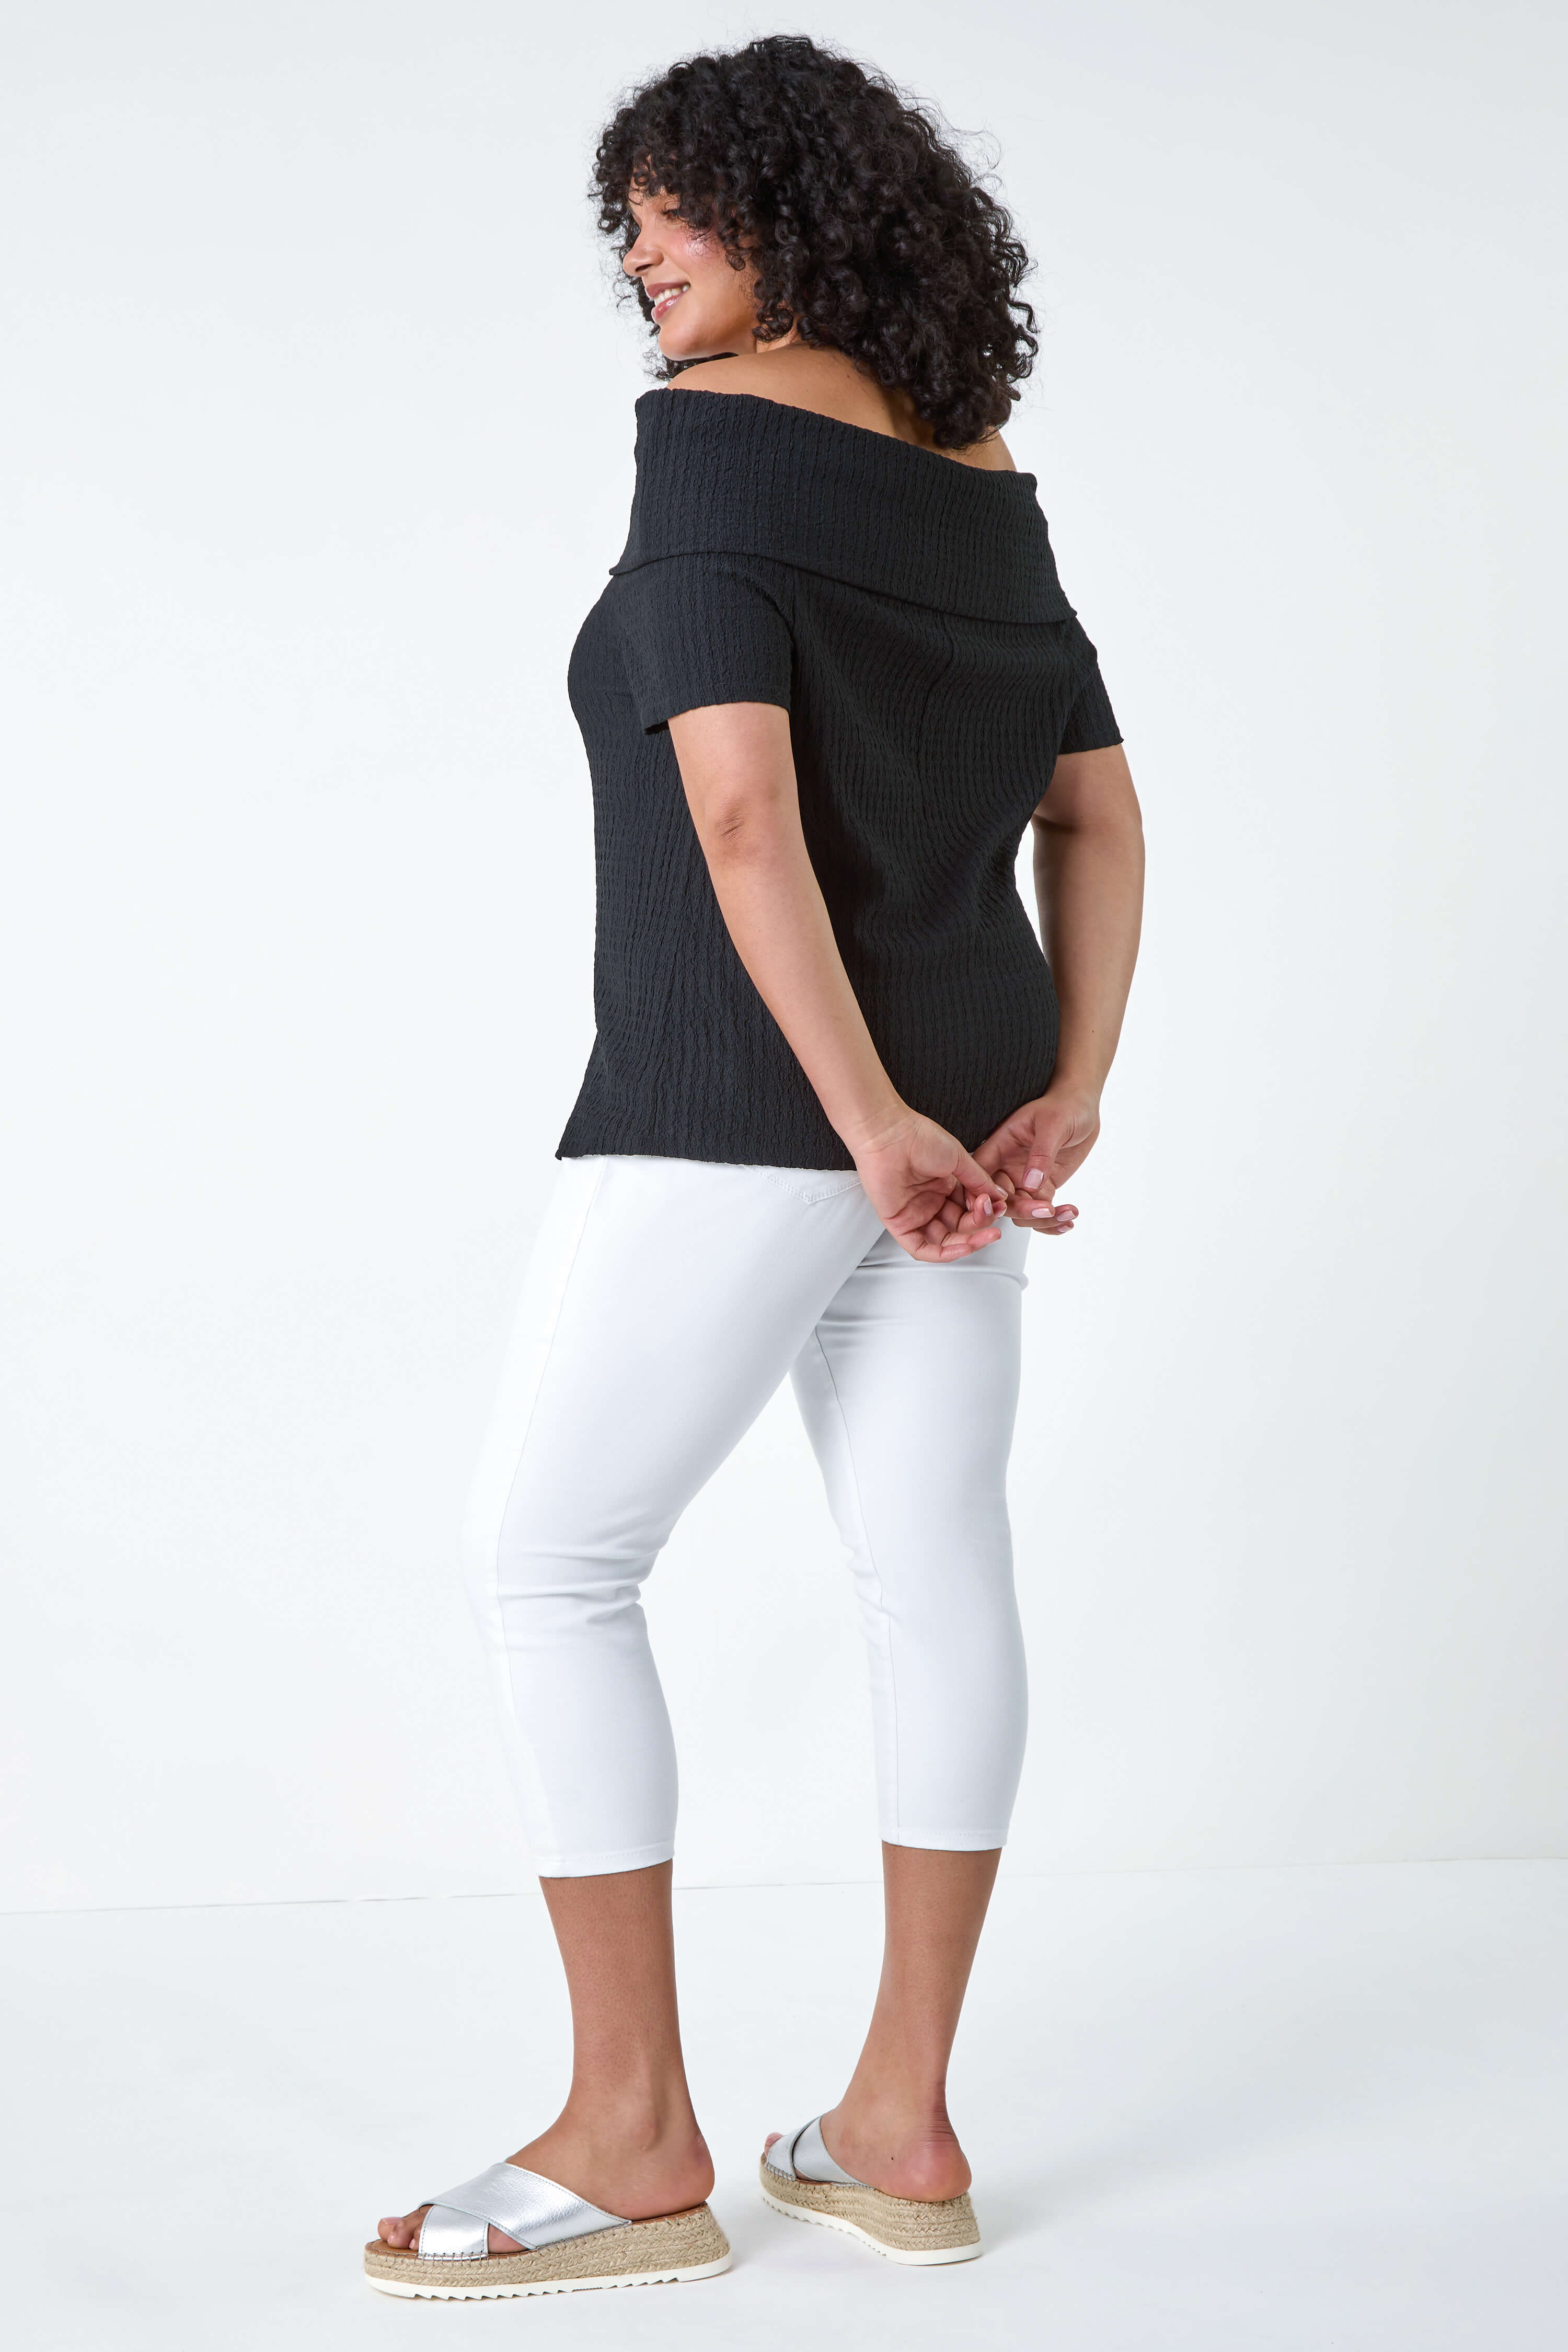 Black Curve Textured Stretch Bardot Top, Image 3 of 5